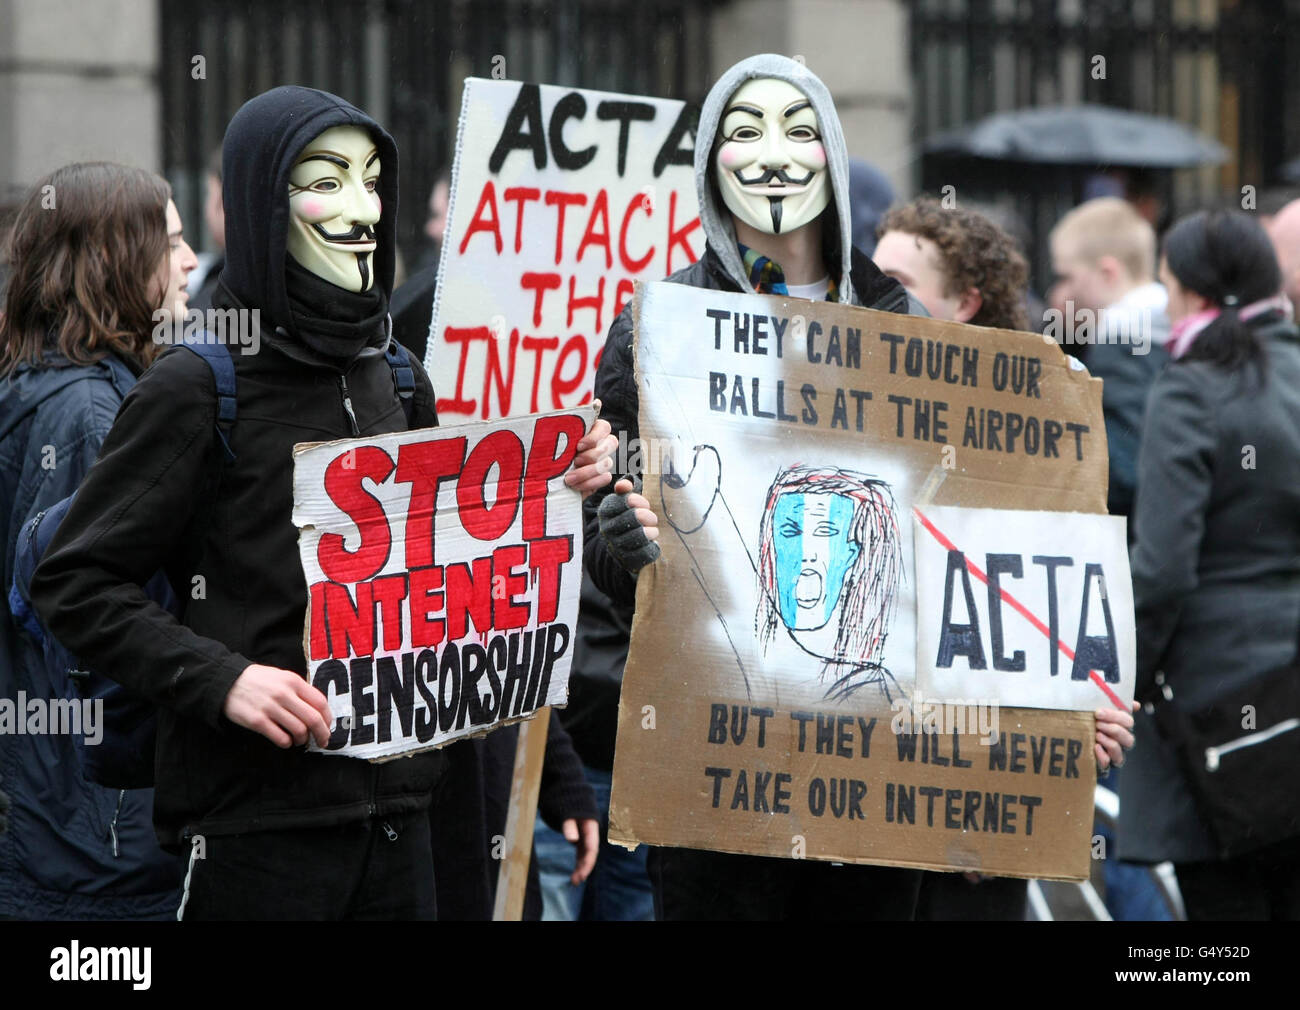 Internet users hold a protest march in Dublin against SOPA (Stop Online Piracy Act) and ACTA (Anti-Counterfeiting Trade Agreement) legislation being implemented by the Irish Government and EU. Stock Photo